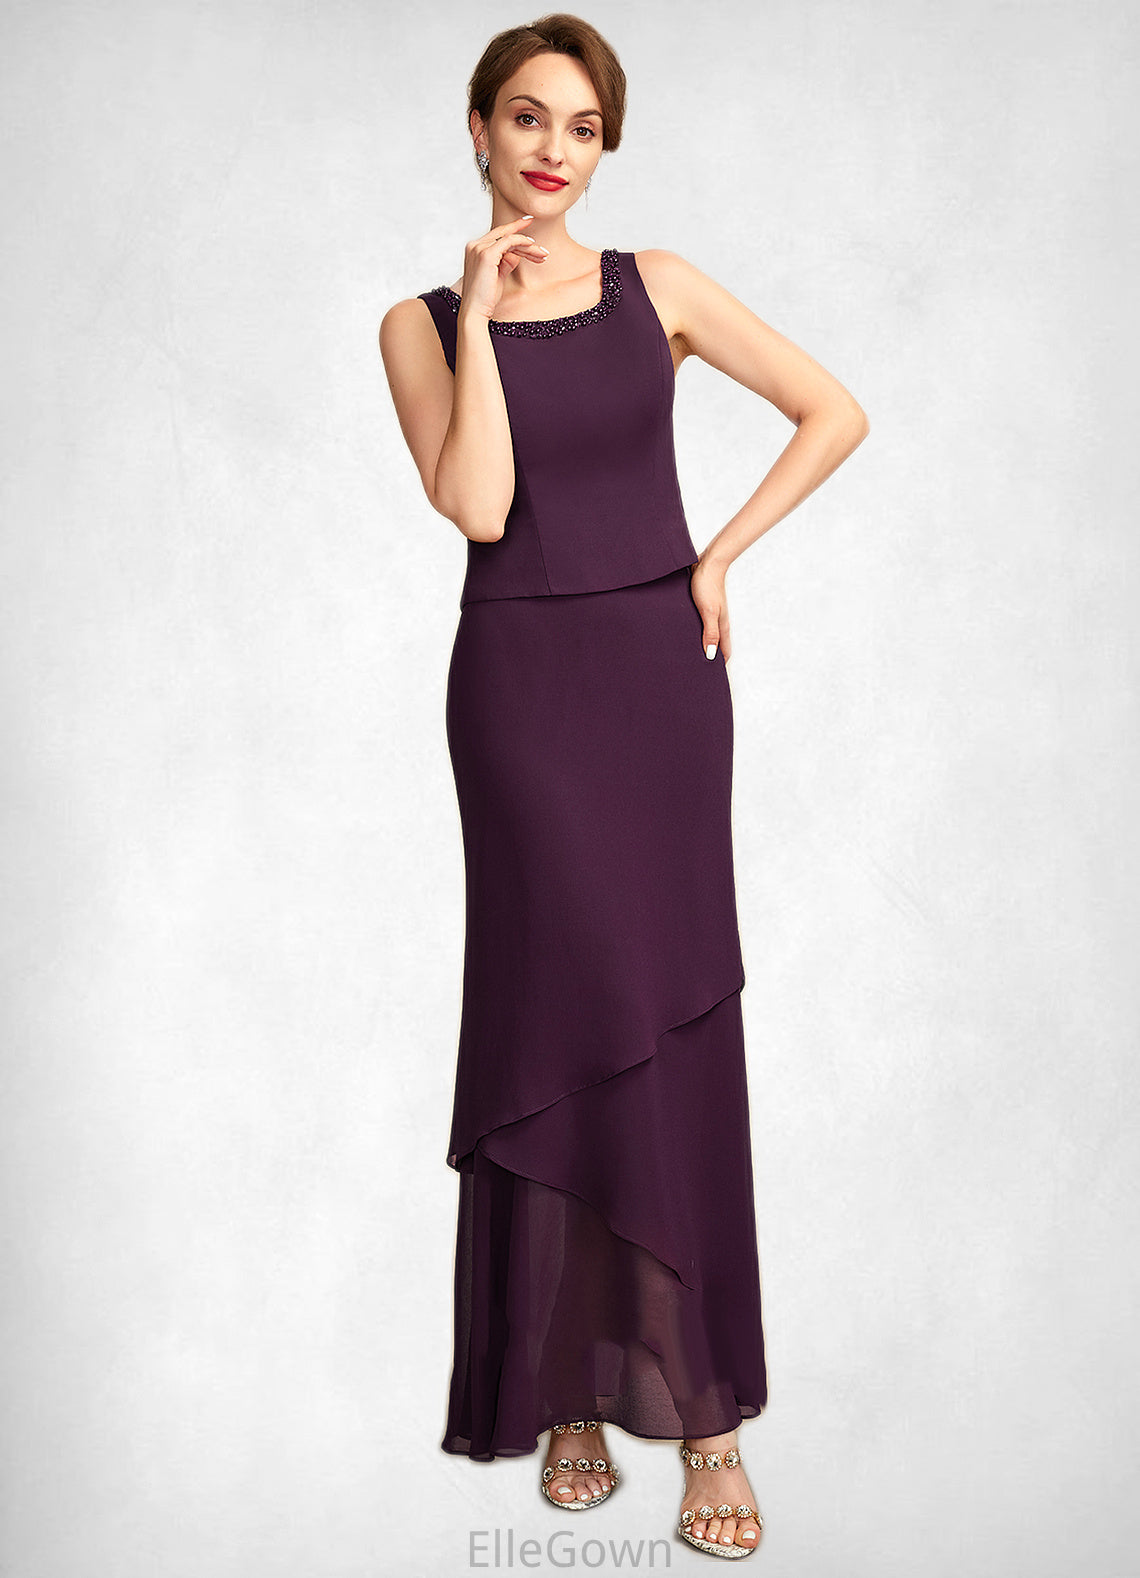 Madeleine Sheath/Column Scoop Neck Ankle-Length Chiffon Mother of the Bride Dress With Beading Sequins DE126P0015024